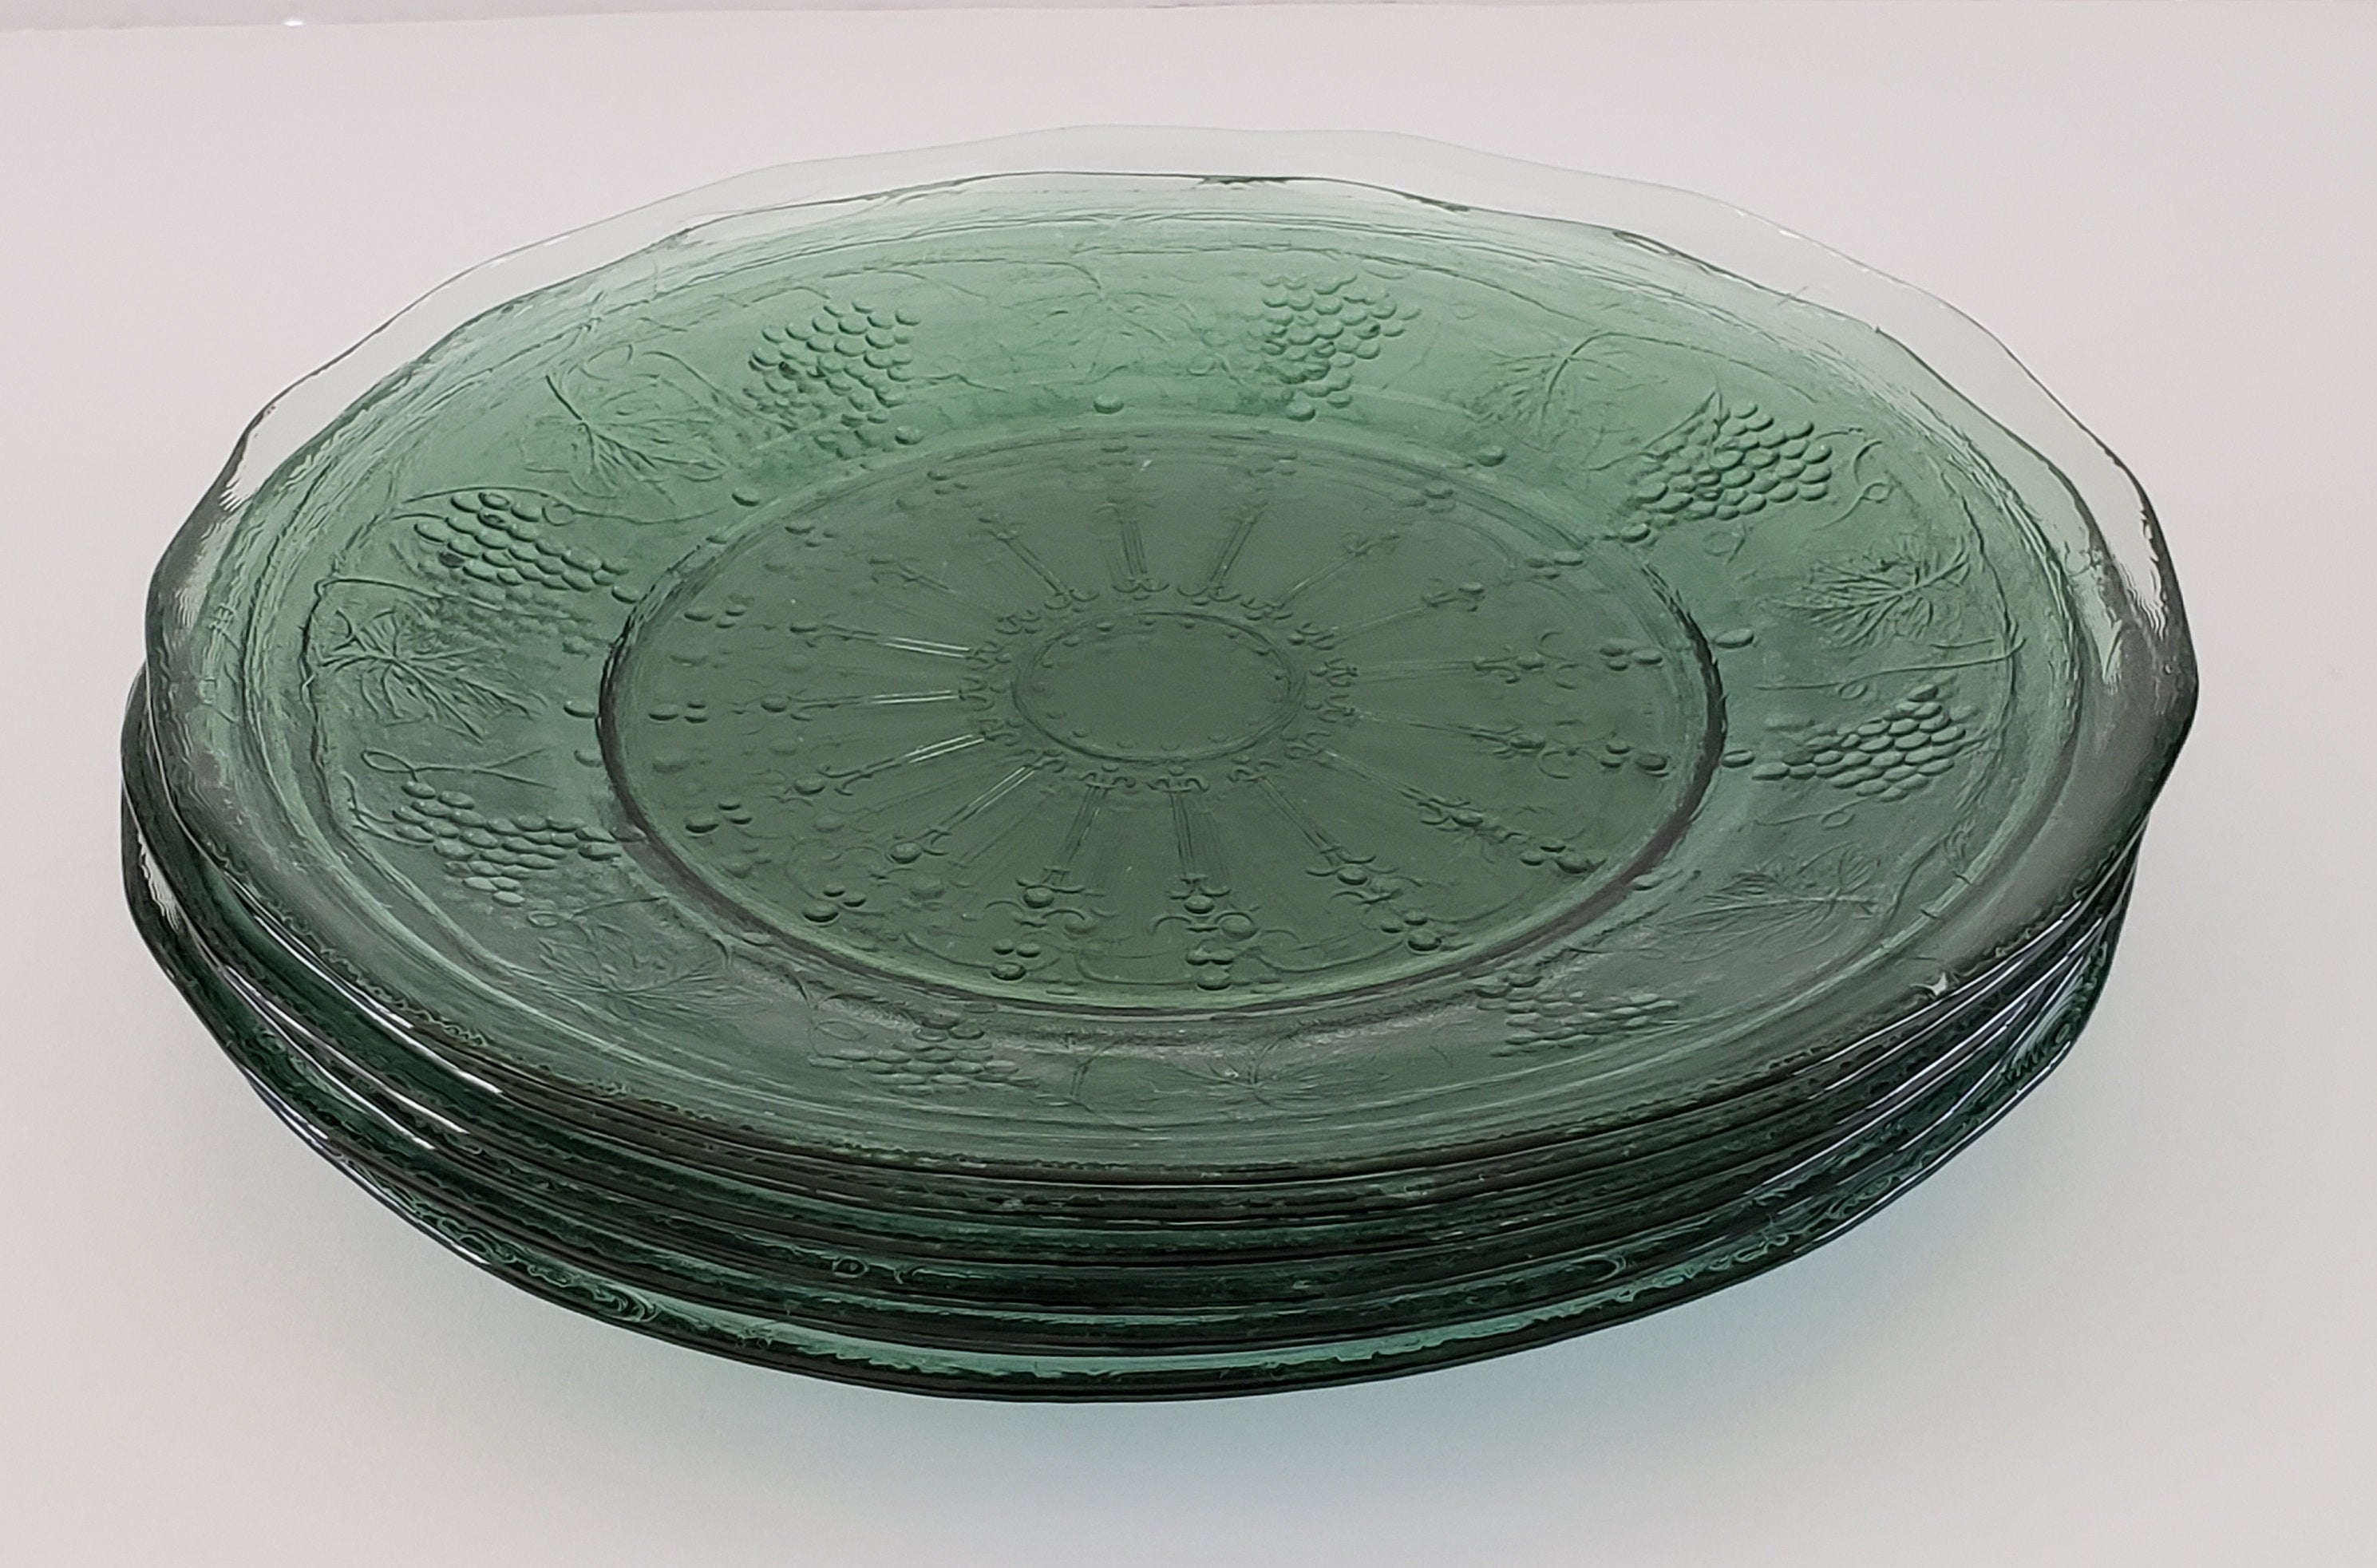 Large Green Glass Plate Arcoroc Minos Jade 10 Antique | Etsy